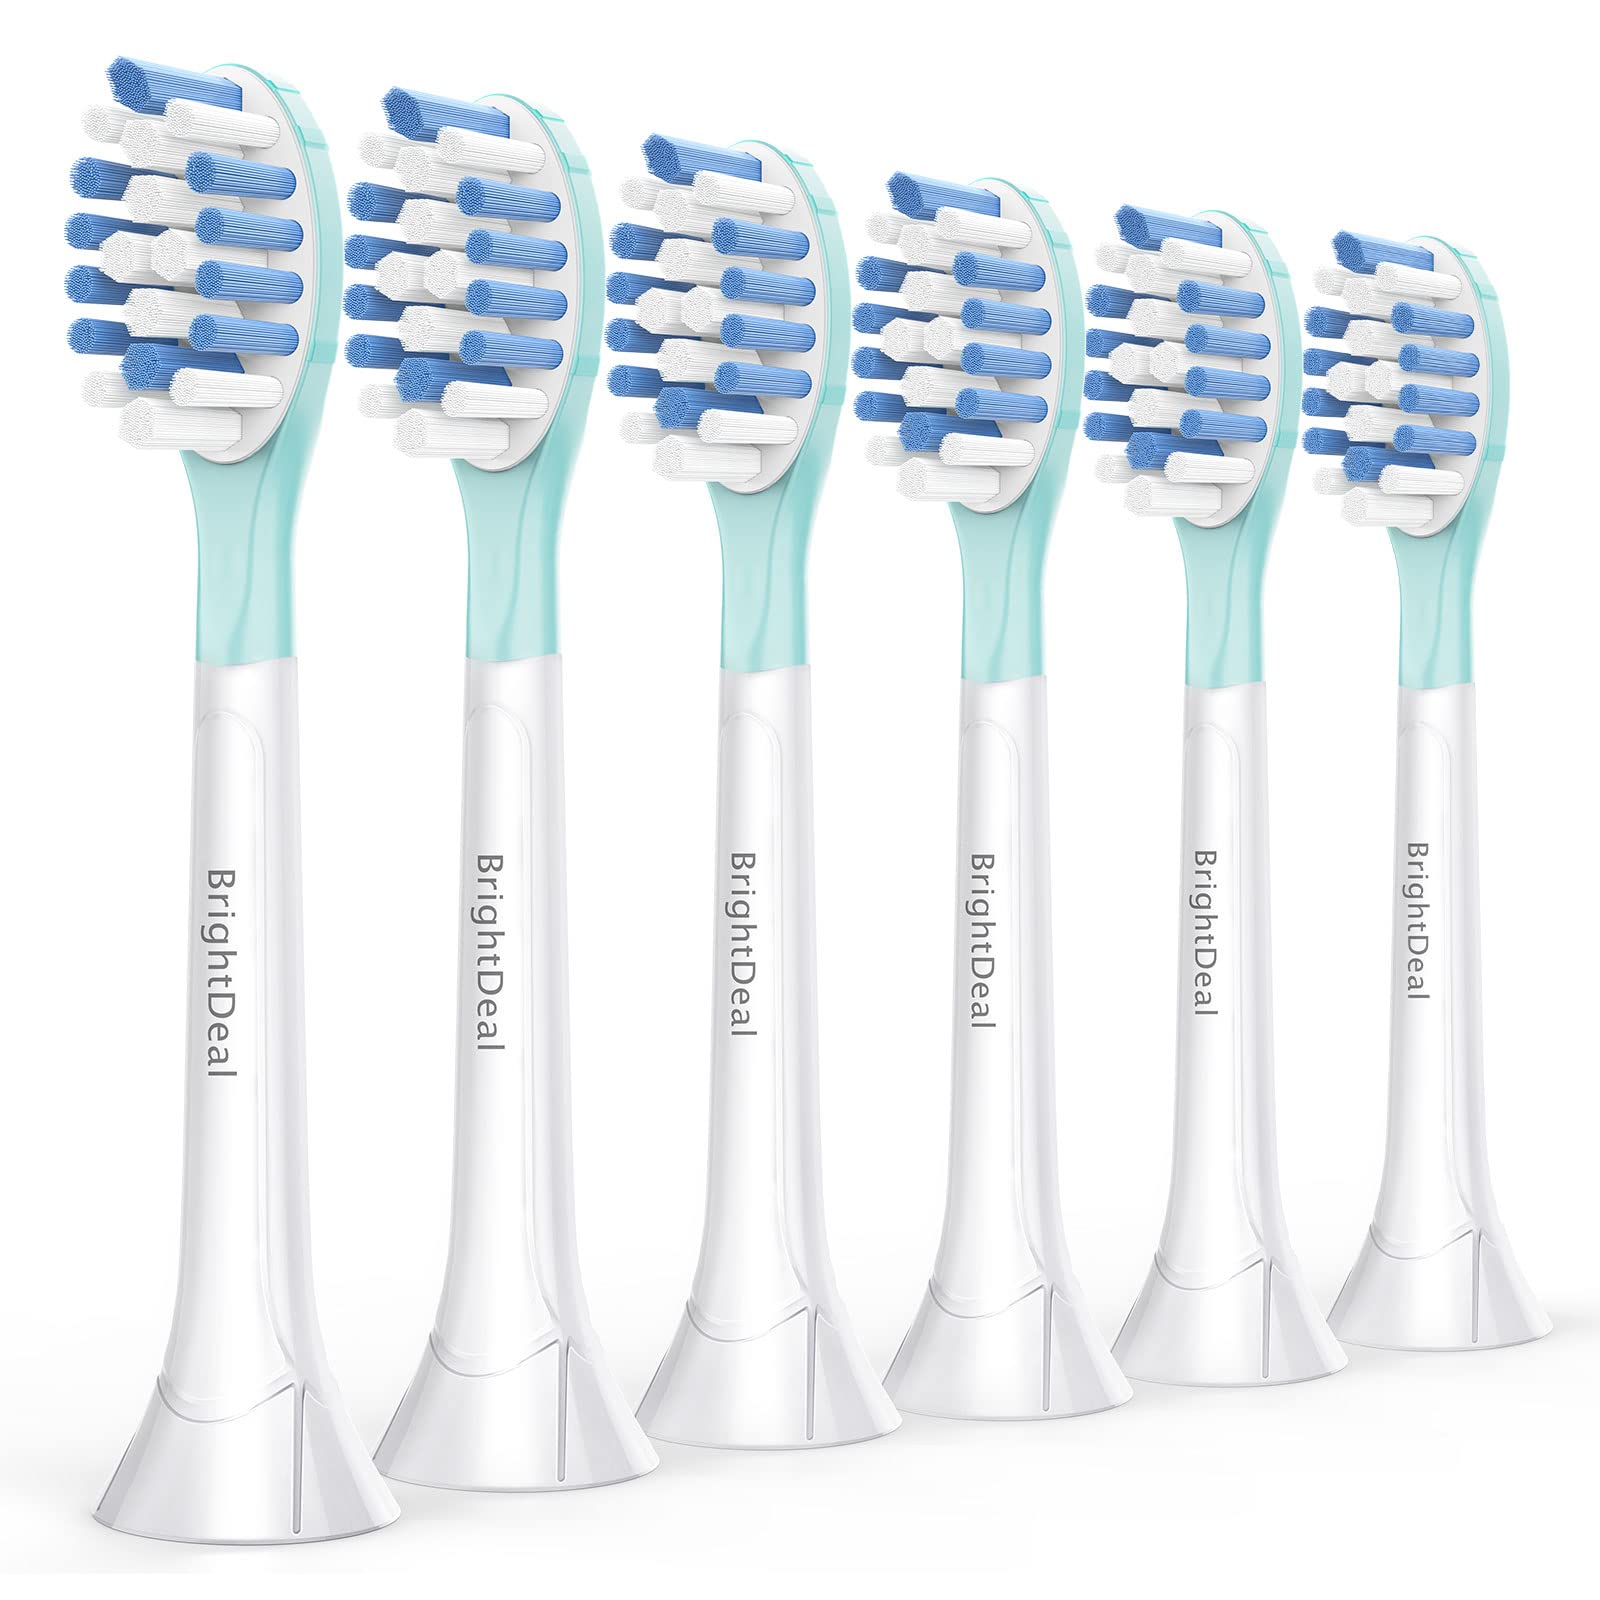 BrightDeal Replacement Heads for Philips Sonicare ProtectiveClean 4100 5100 6100 DiamondClean 9500 ExpertClean 7500 FlexCare HealthyWhite Electric Sonic Toothbrush C3 G3 W3 C2 G2 Brush, White, 6 Pack